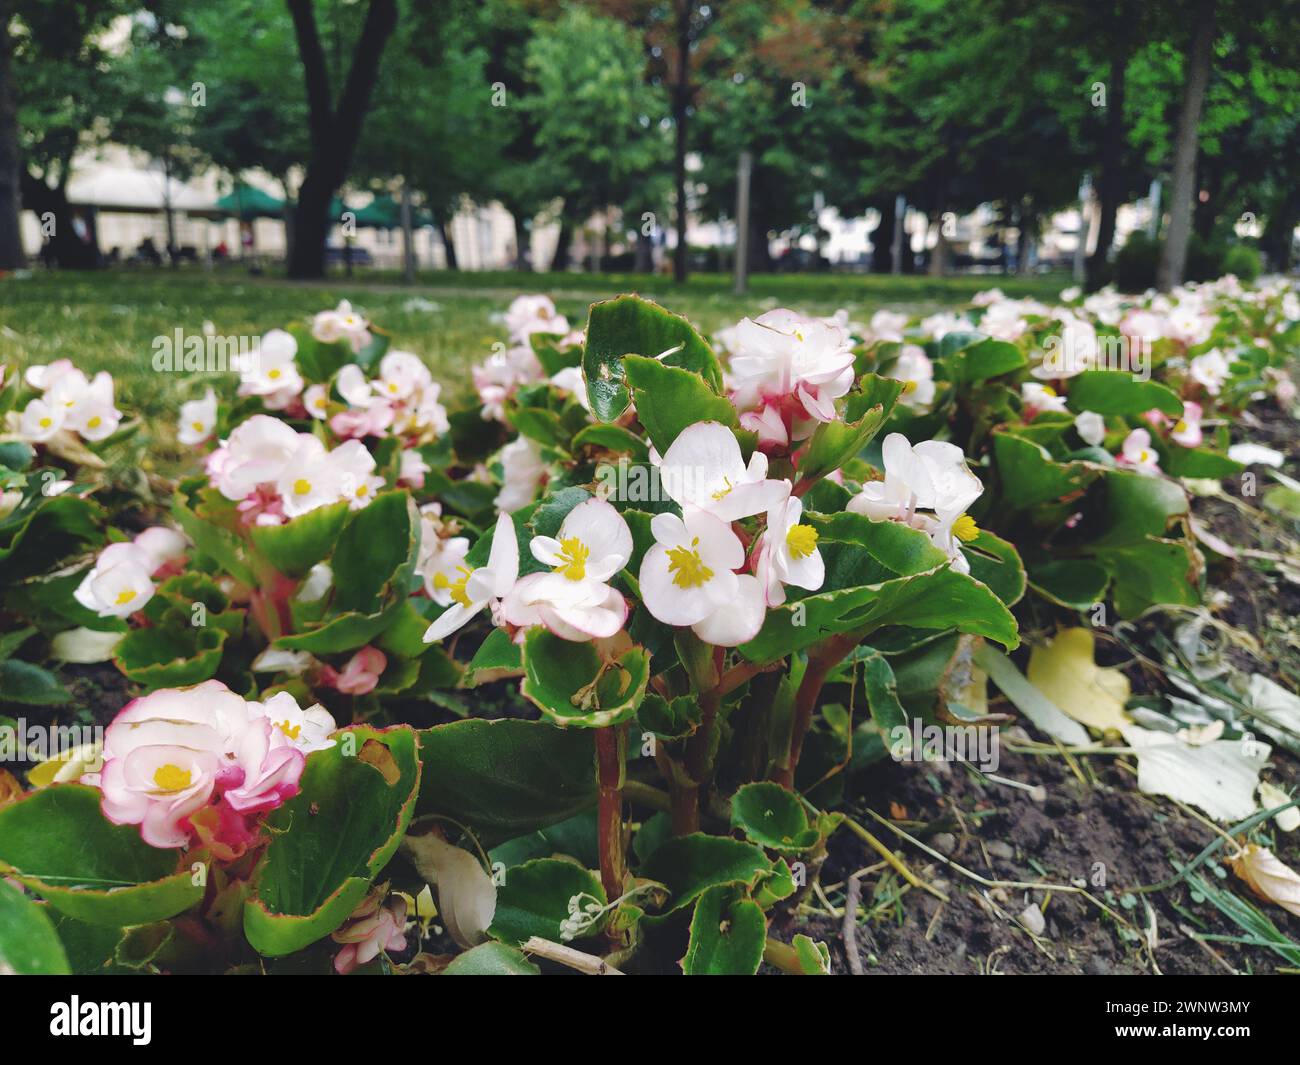 Begonia is a genus of plants in the Begonia family. Decorative gardening. Decoration of lawns, parks, flower beds, city streets and avenues. Begonia Stock Photo